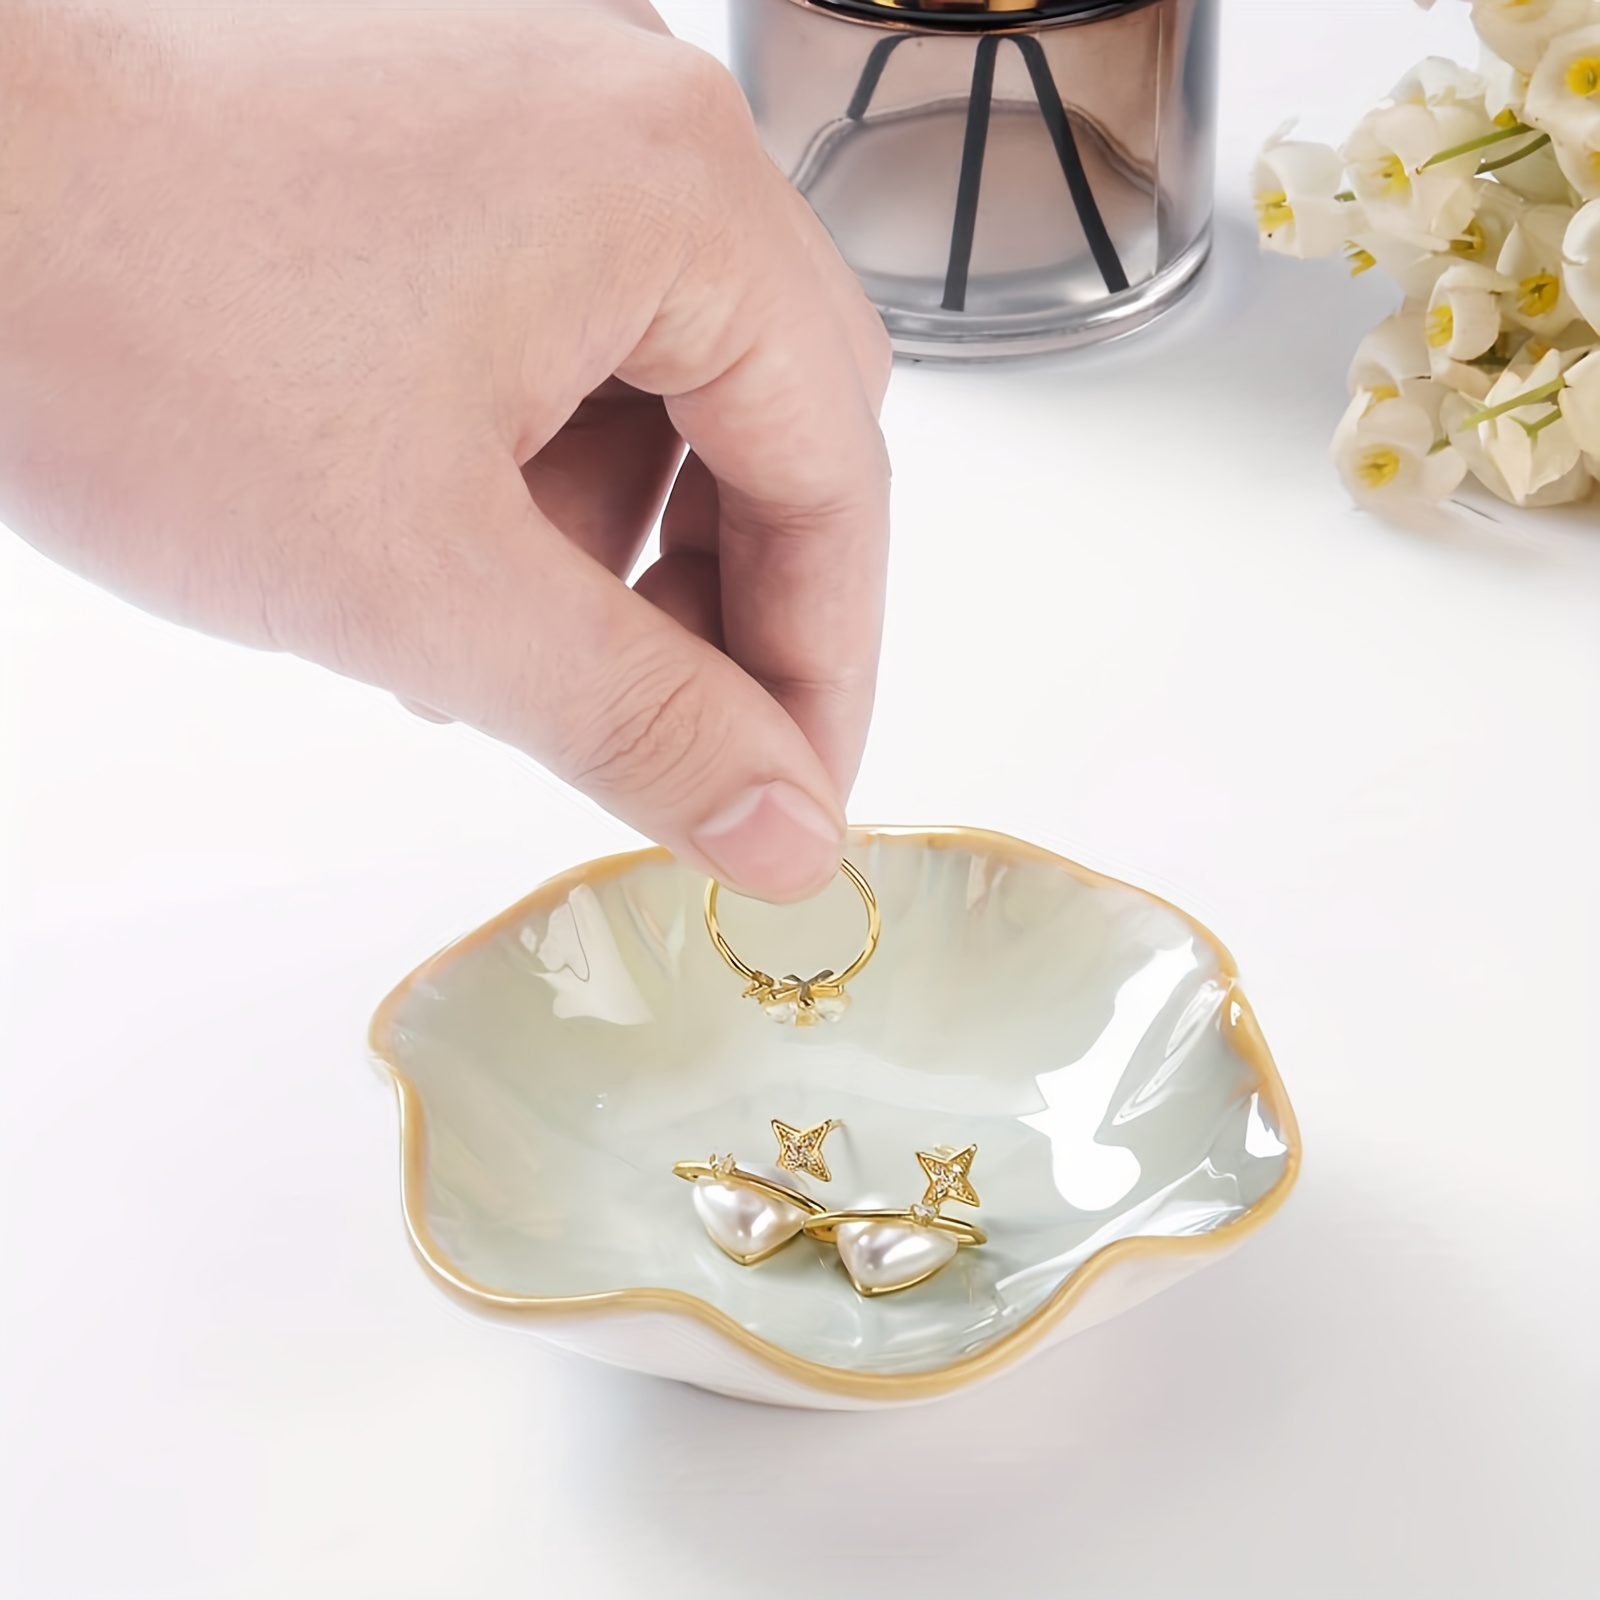 Shell Trinket Dish, Ceramic Ring Holder/Jewelry Tray, Cute Organizer Plate  Vanity Decorations Accessories for Home Décor Bathroom